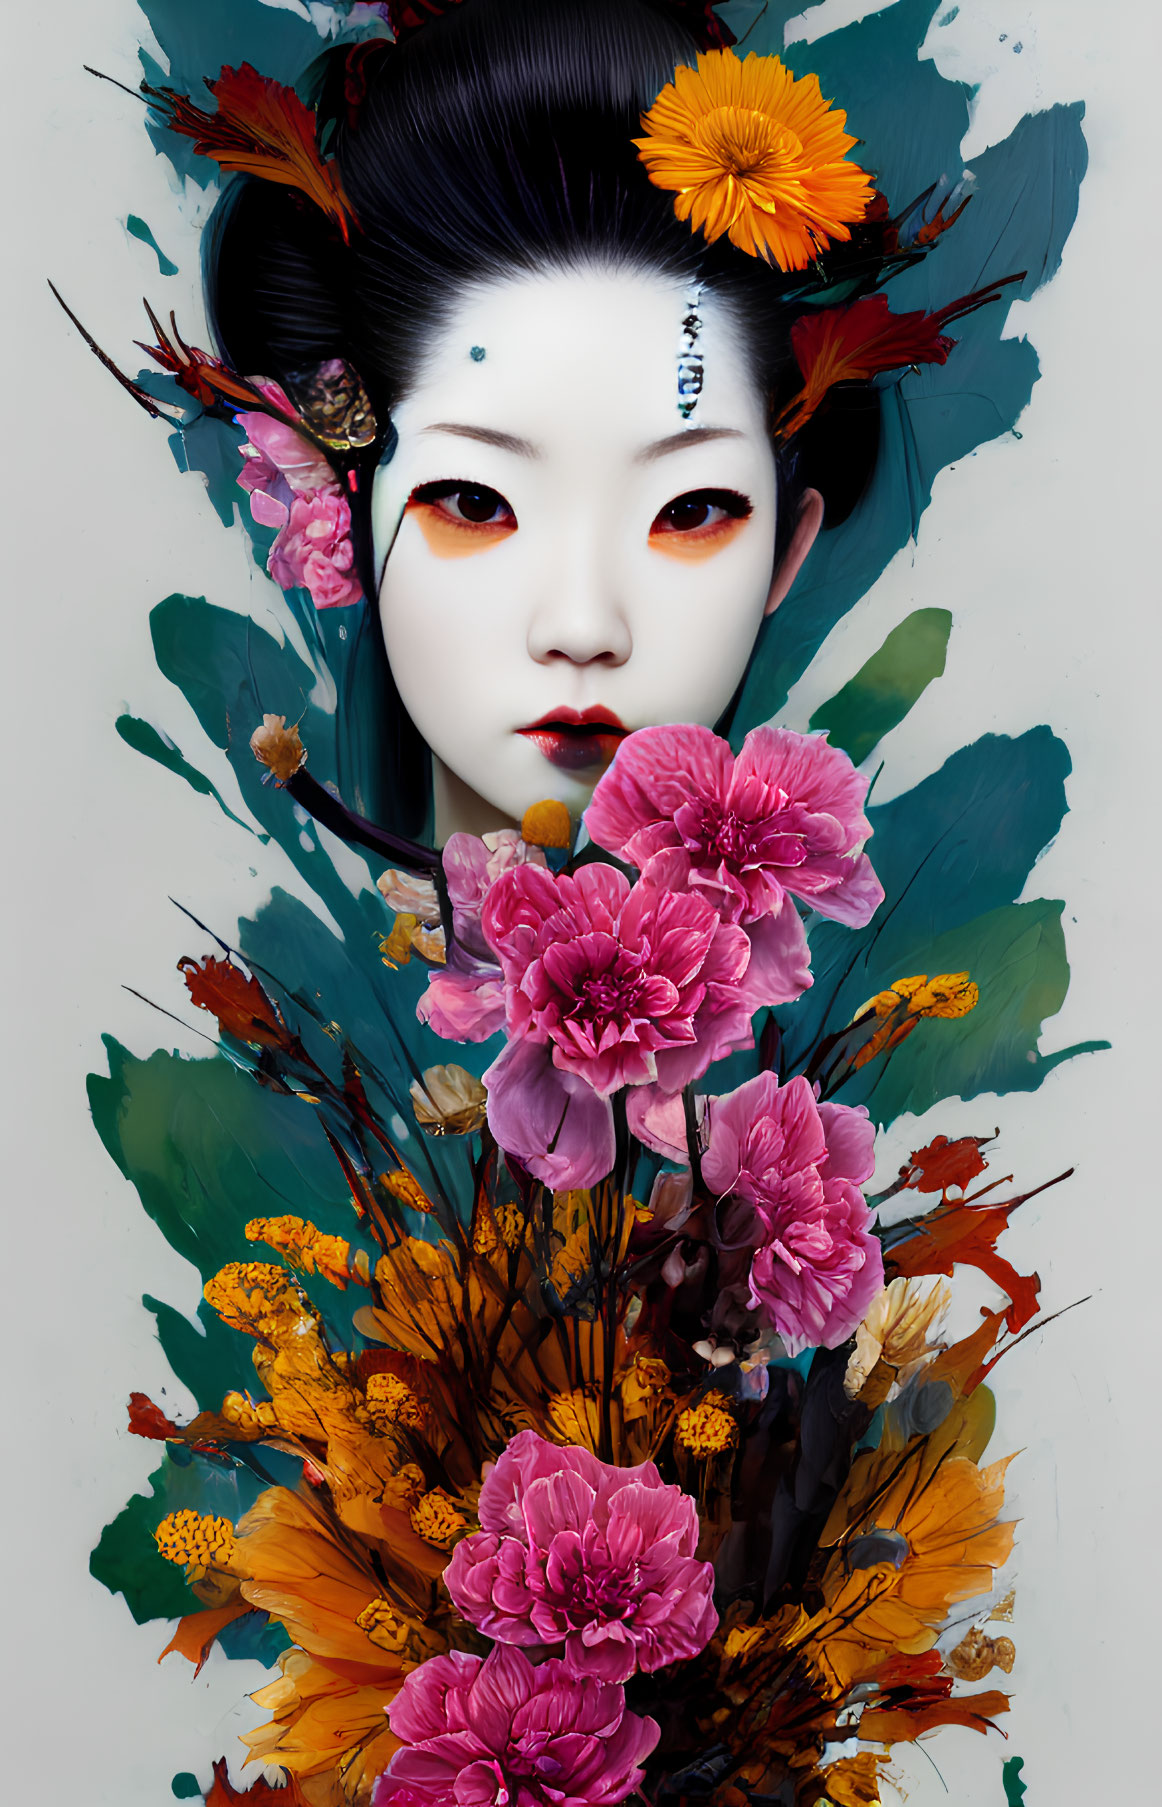 Geisha portrait with vibrant makeup and colorful brushstrokes